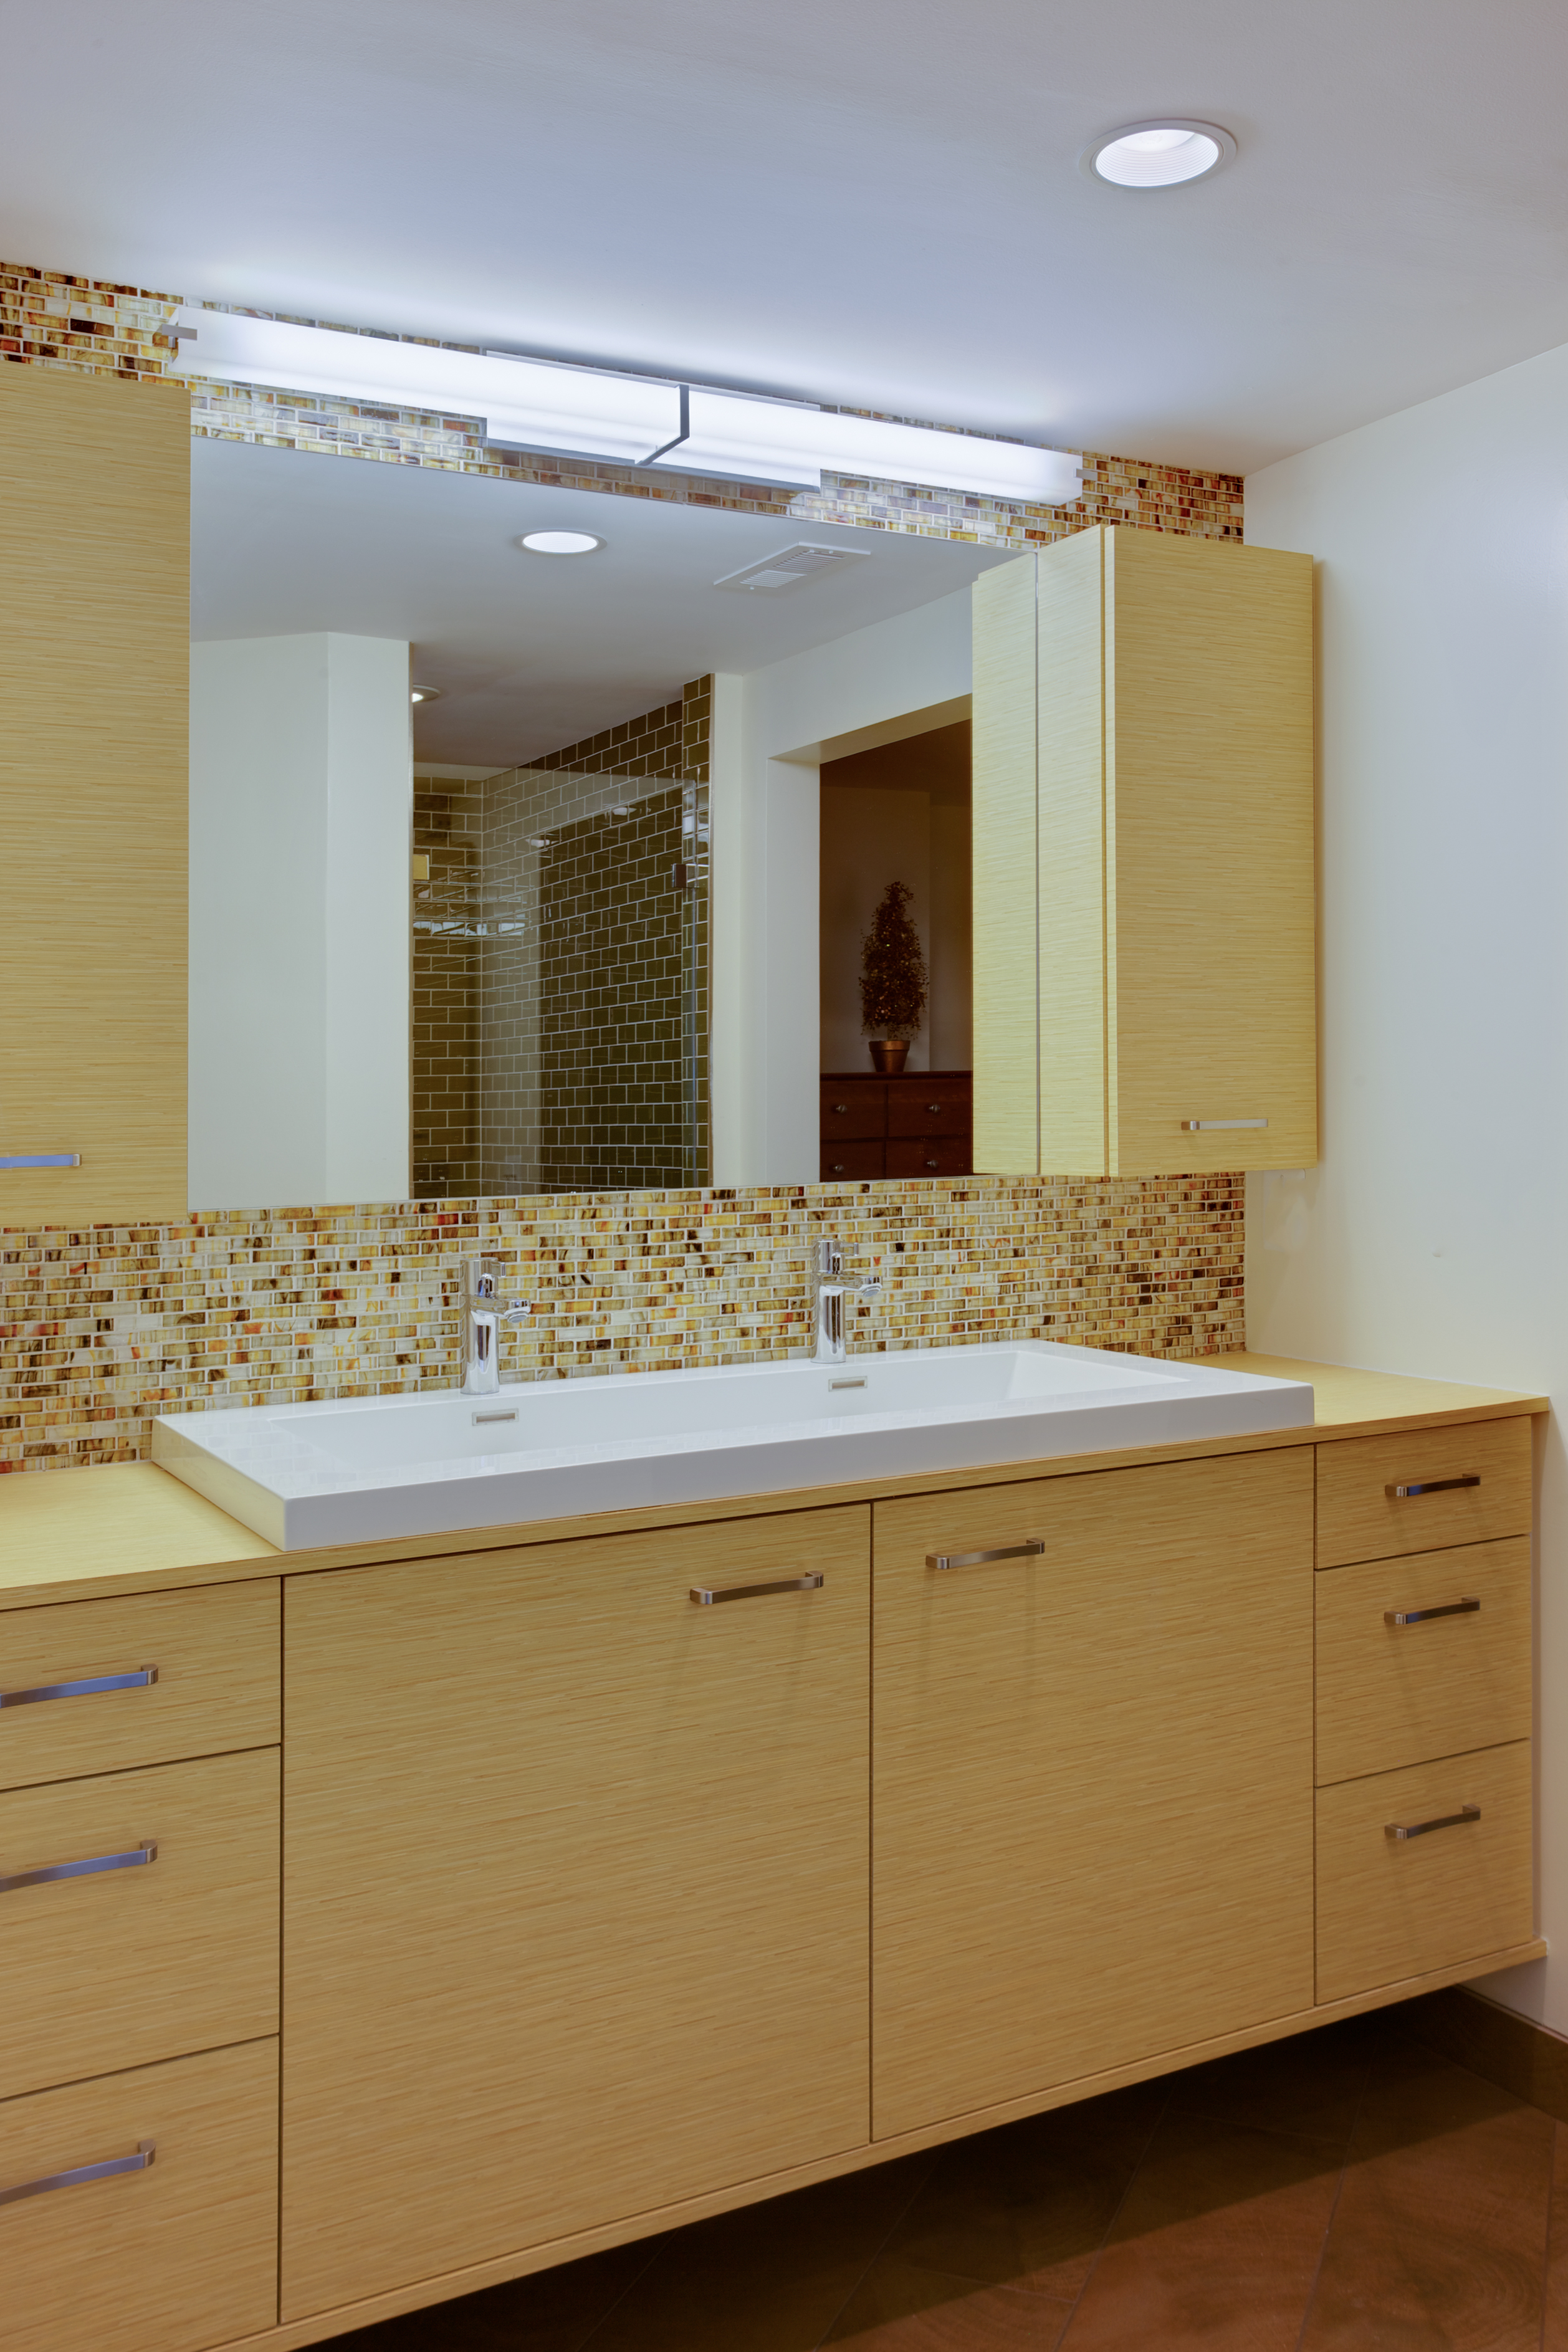 Bathroom with double vanity and yellow, wood cabinetry - view 4 